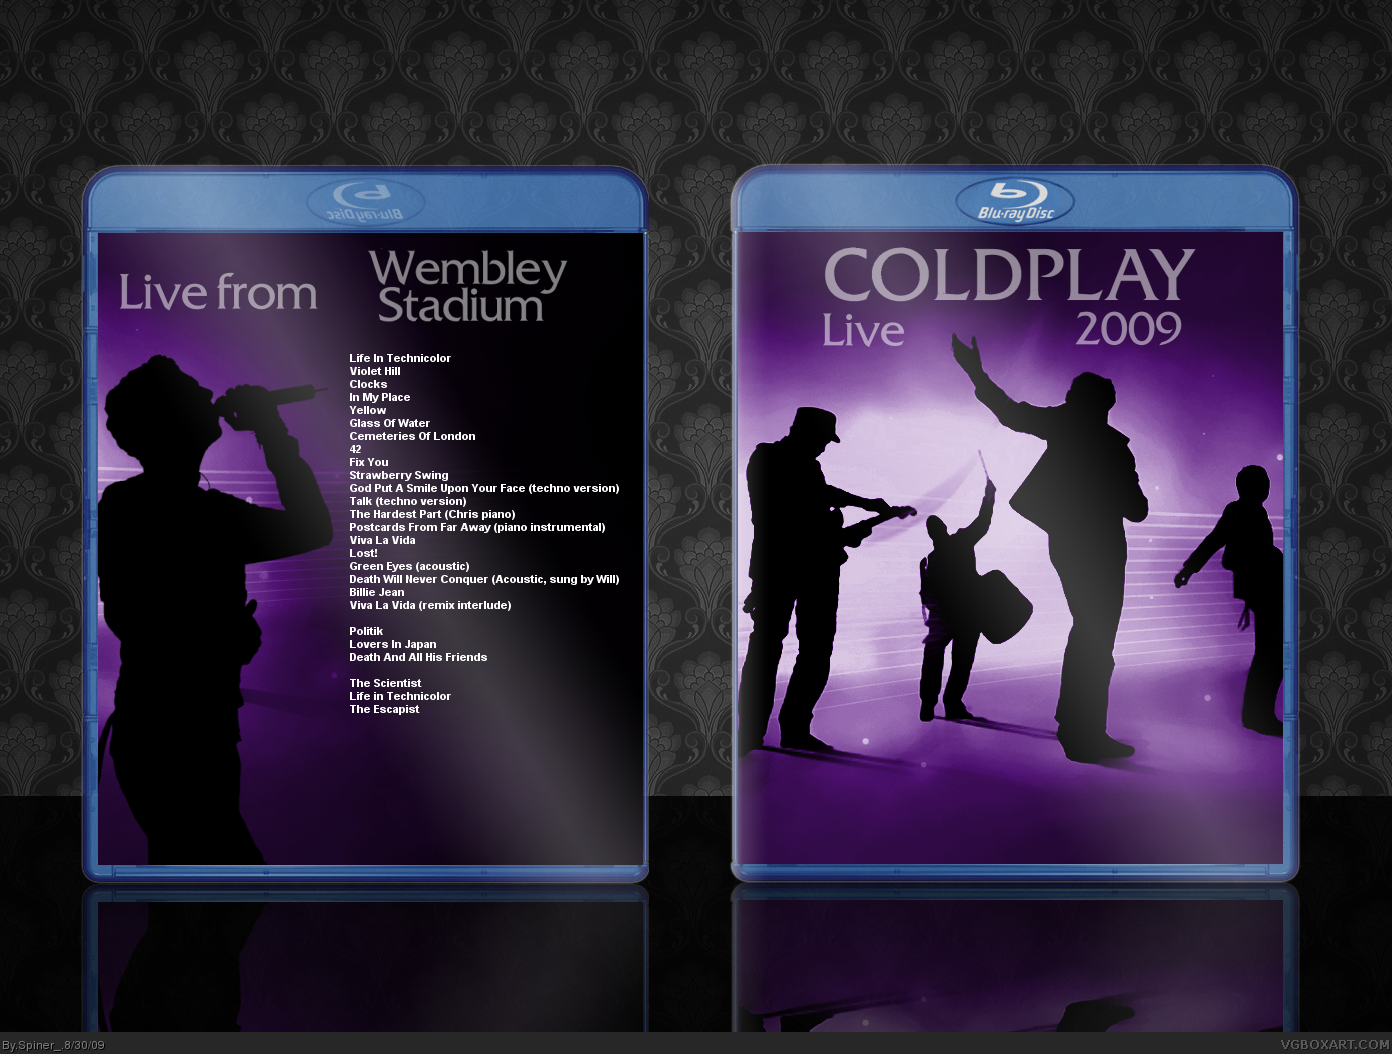 Coldplay - Live 2009 box cover